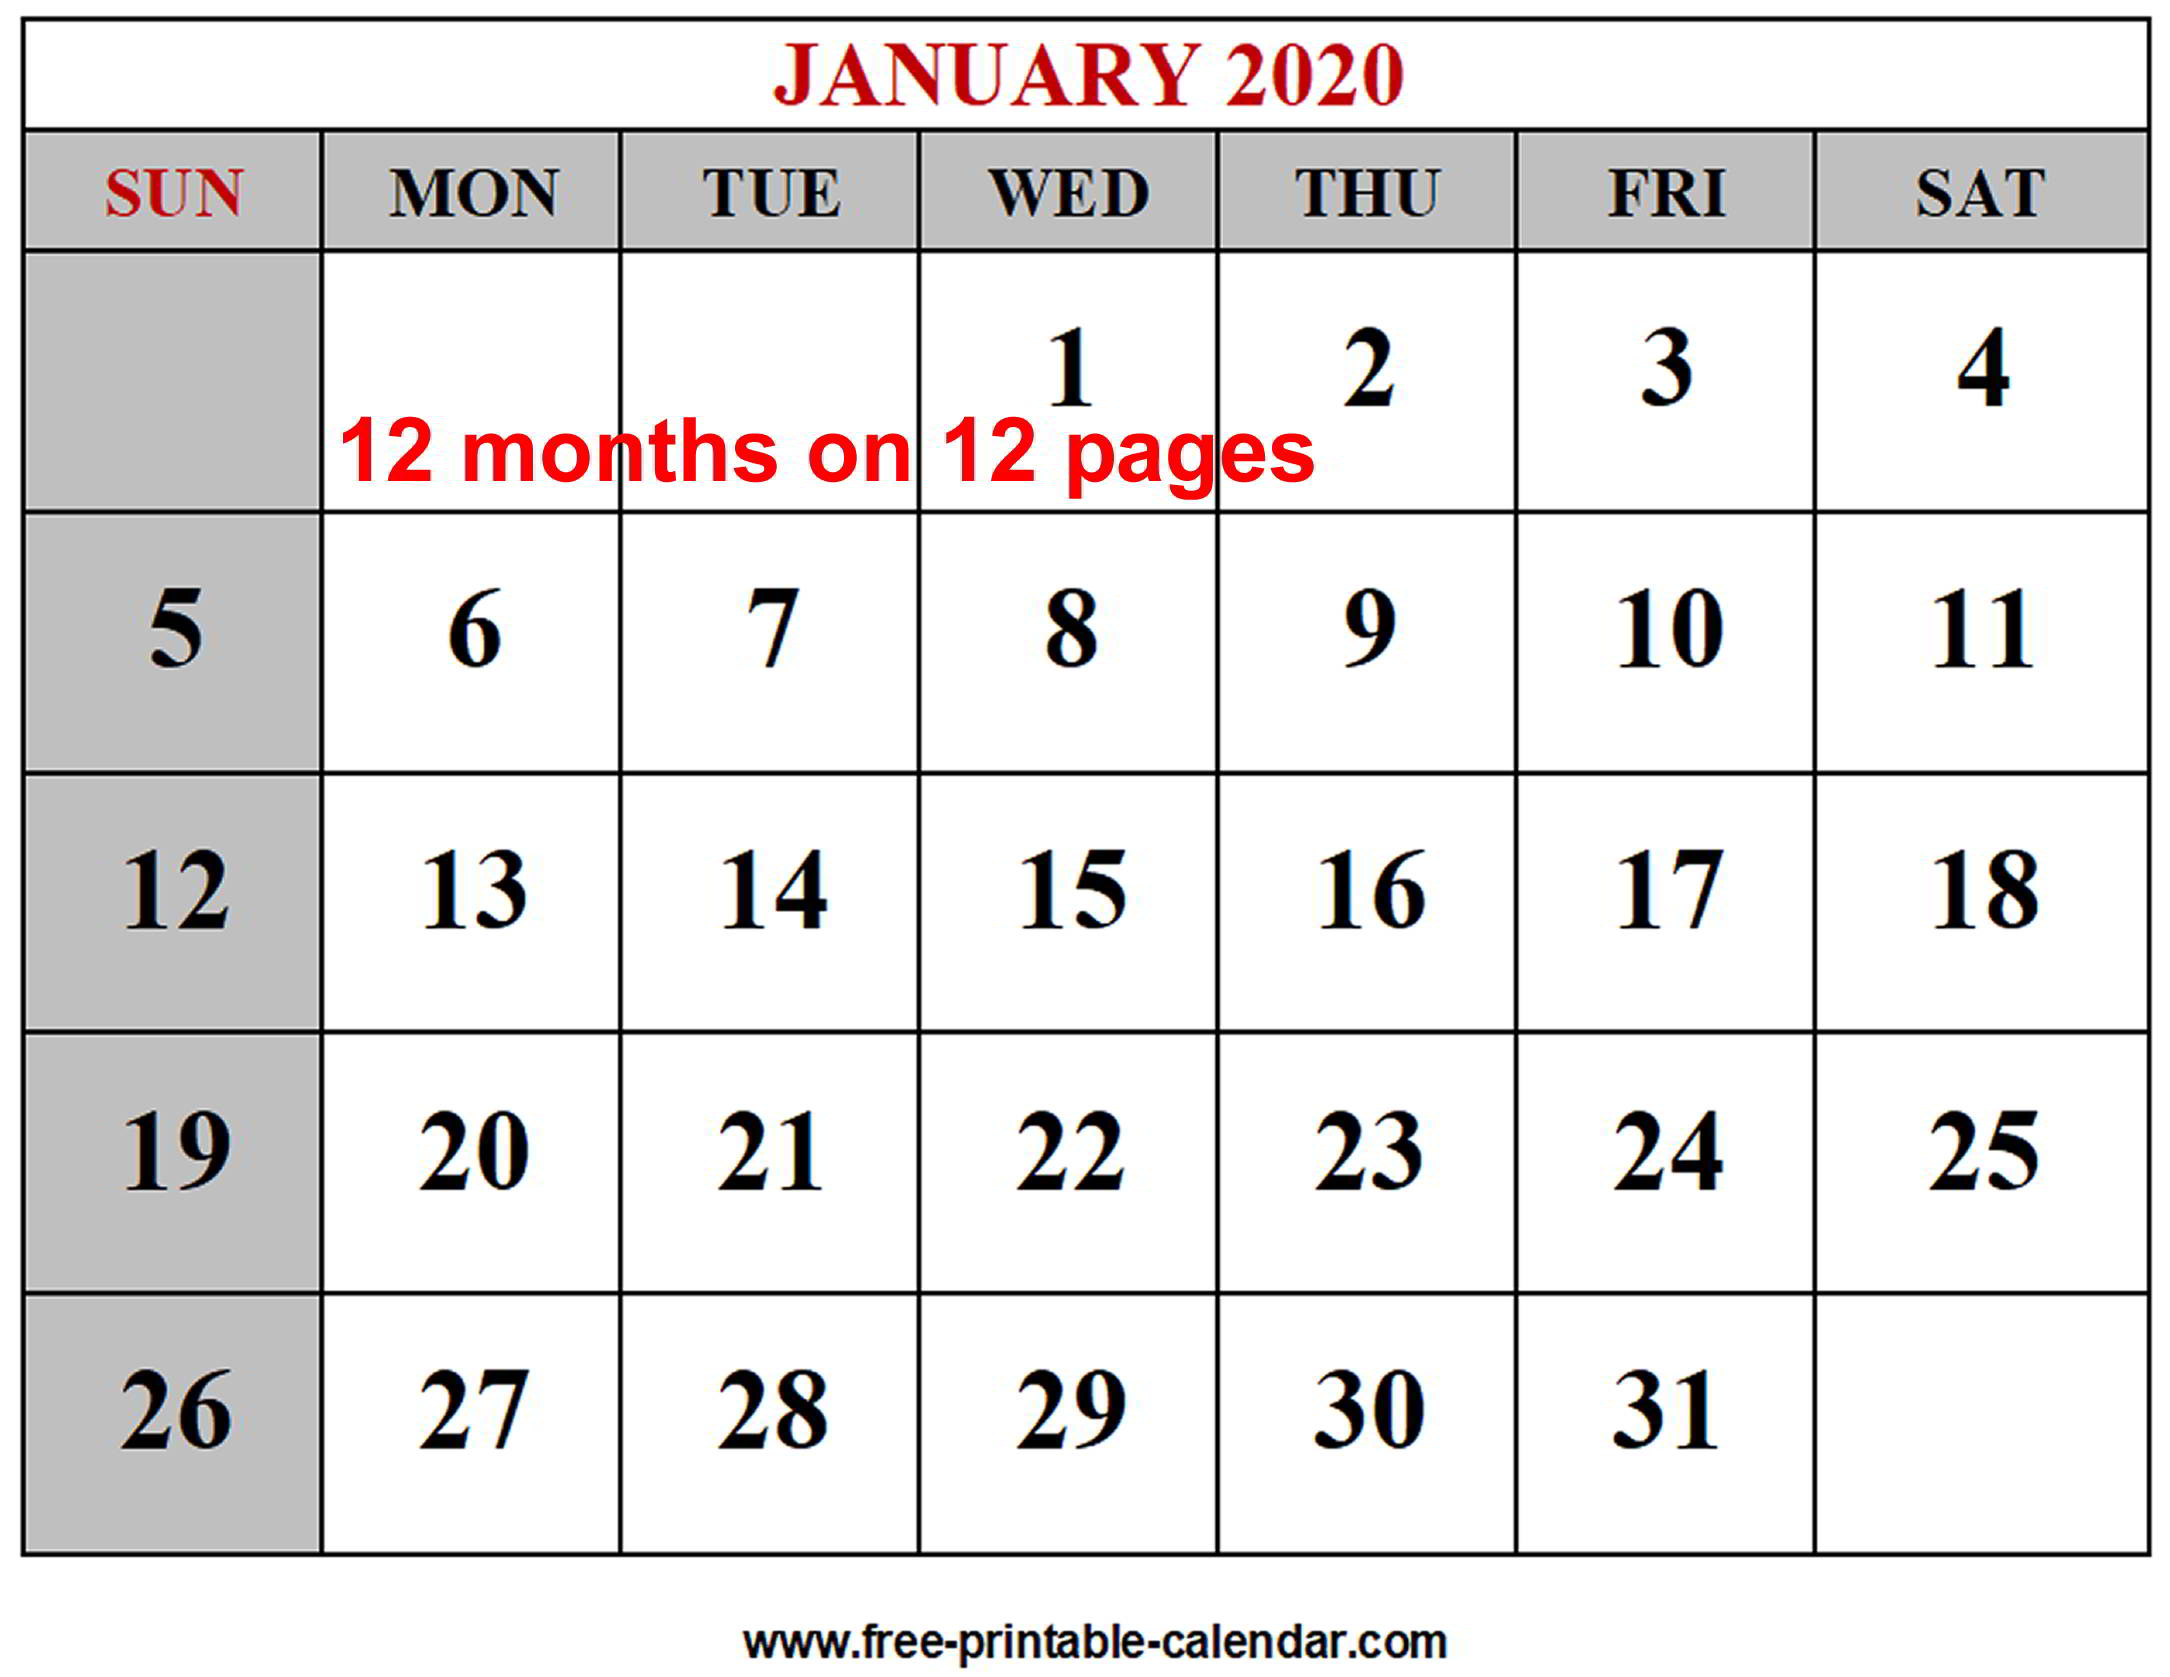 Free Printable Monthly Calendar Templates 2020 - Wpa.wpart.co